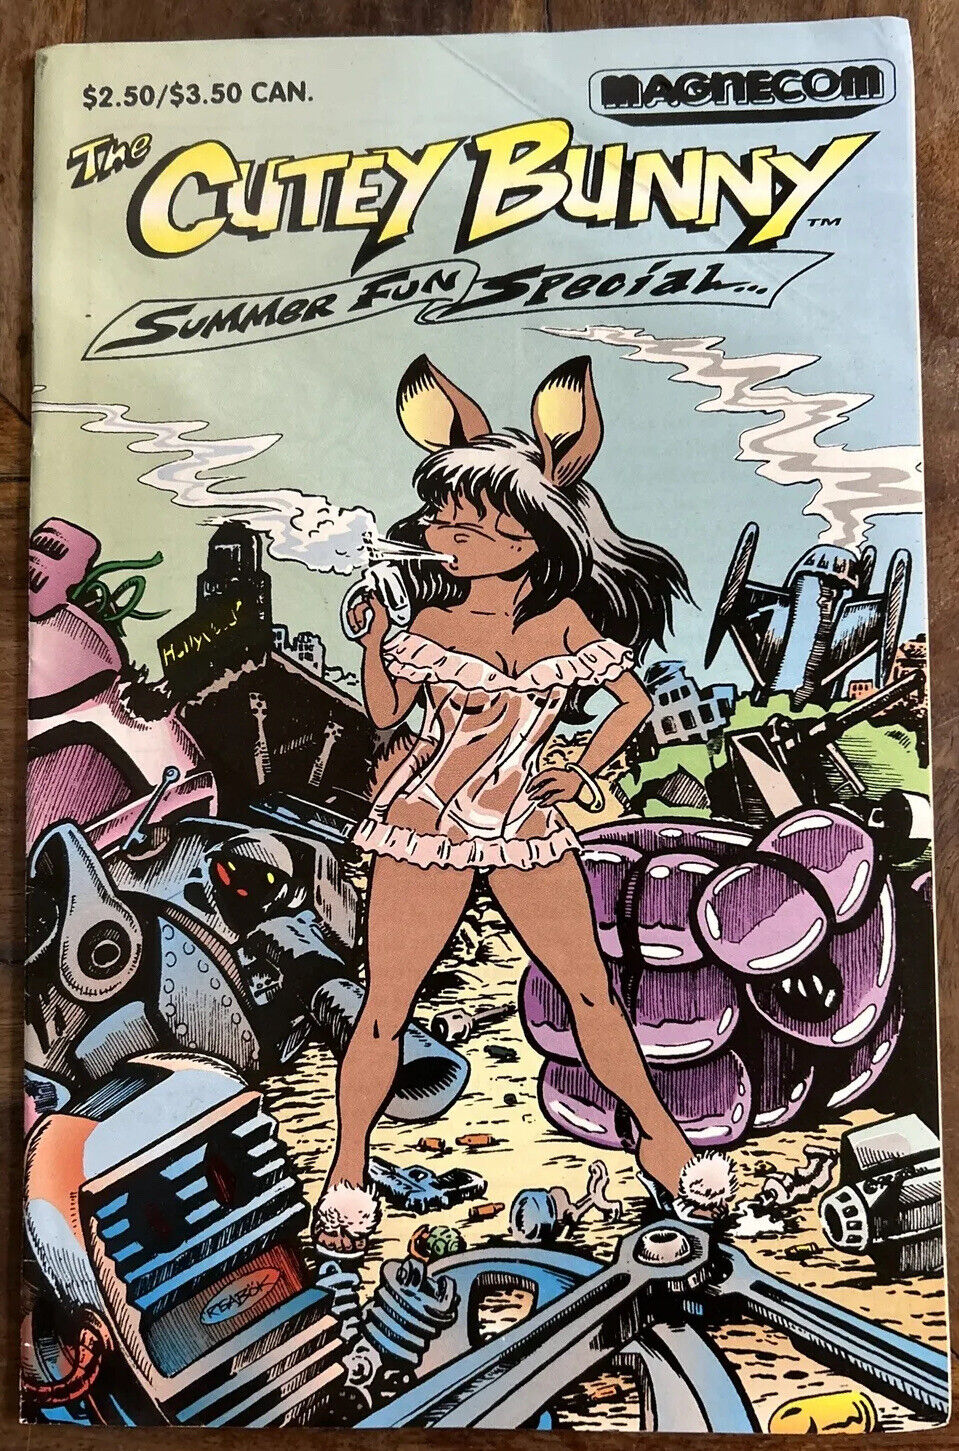 THE CUTEY BUNNY Signed Copy Of Summer Fun Special 1994 Magnecom Comic Books